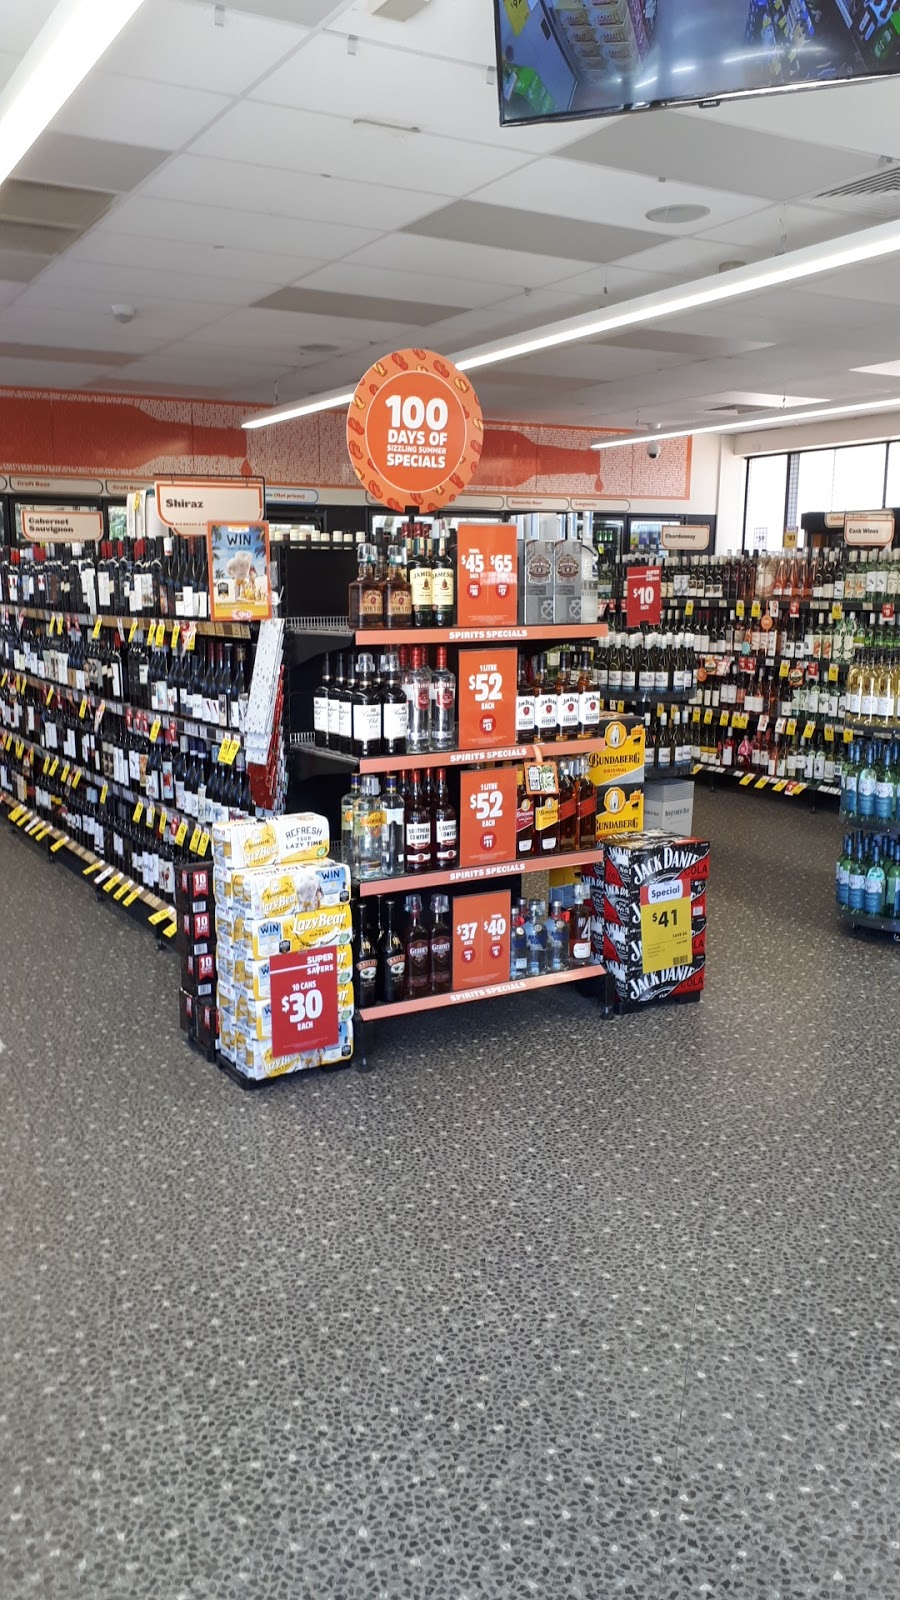 BWS Swan Hill (Campbell St) | store | 283 Campbell St, Swan Hill VIC 3585, Australia | 0350321655 OR +61 3 5032 1655